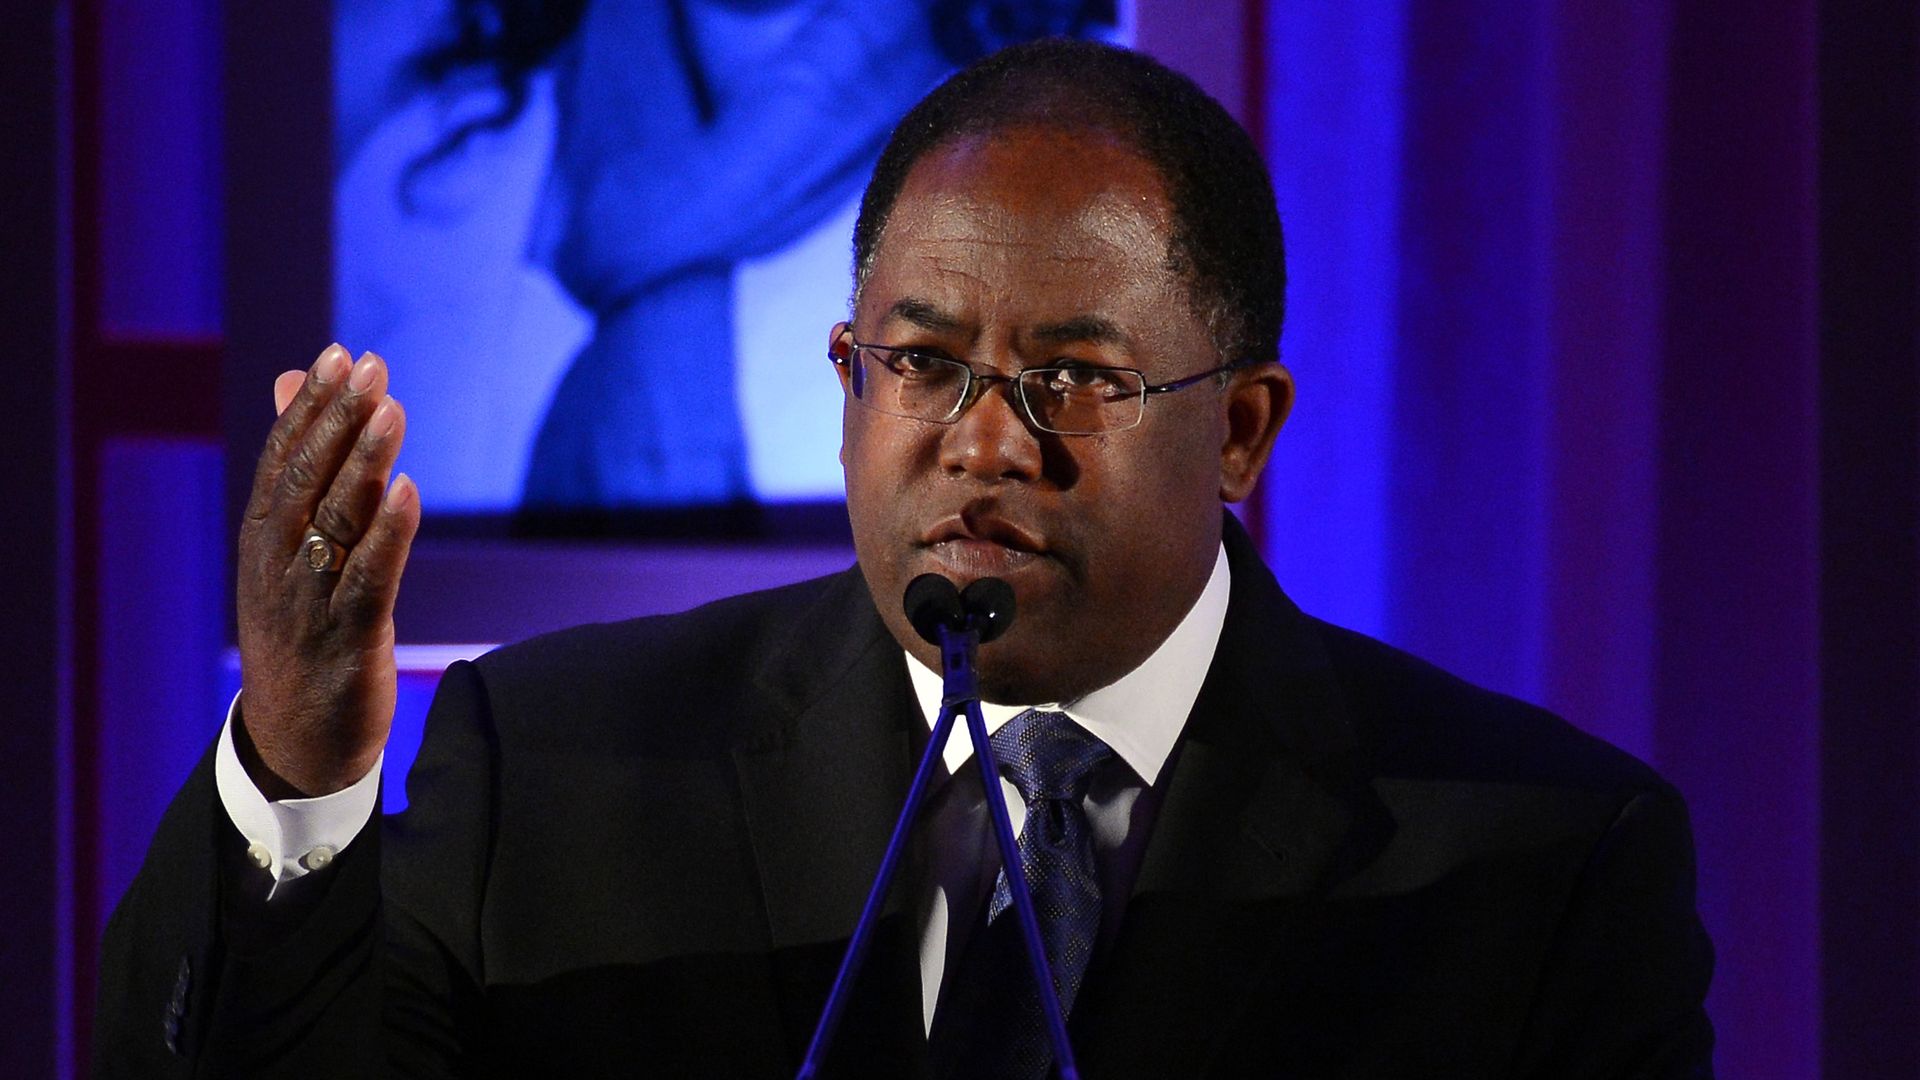 Los Angeles County official Mark Ridley-Thomas speaks onstage during an event at Beverly Hills Hotel on December 6, 2012 in Beverly Hills, California. 